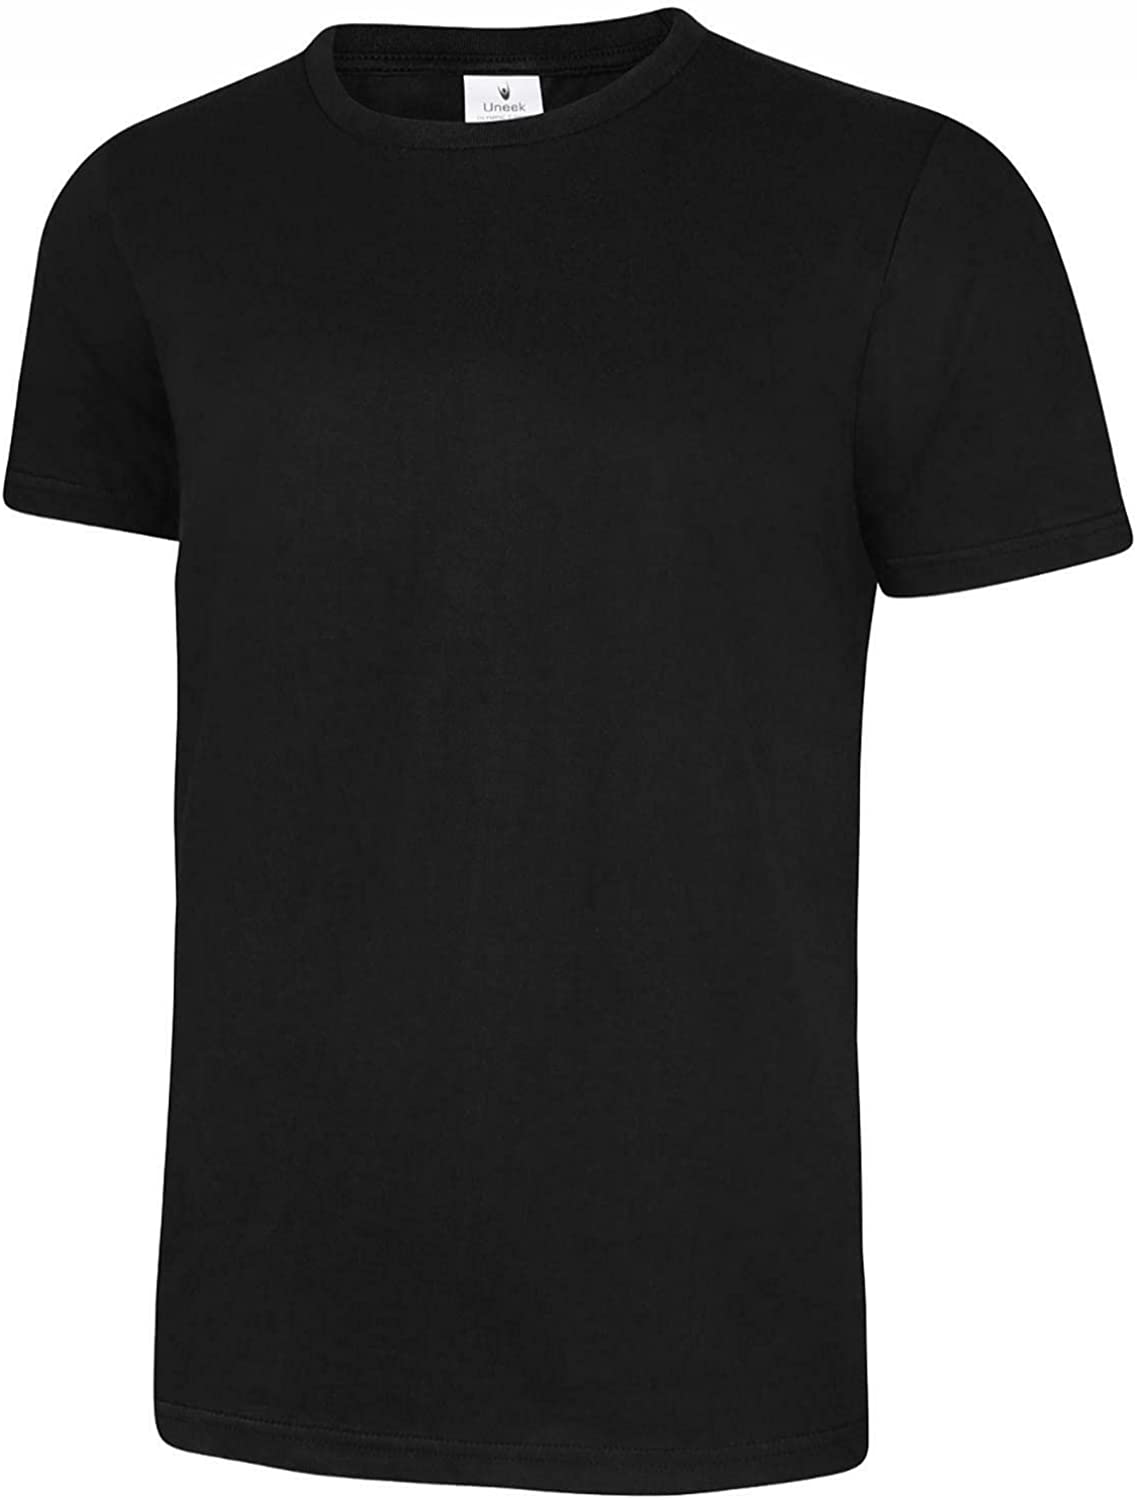 Mens Short Sleeves Slim Fit Twin Stitching Cotton T Shirts Adults Crew Neck Plain Cool Summer Tops